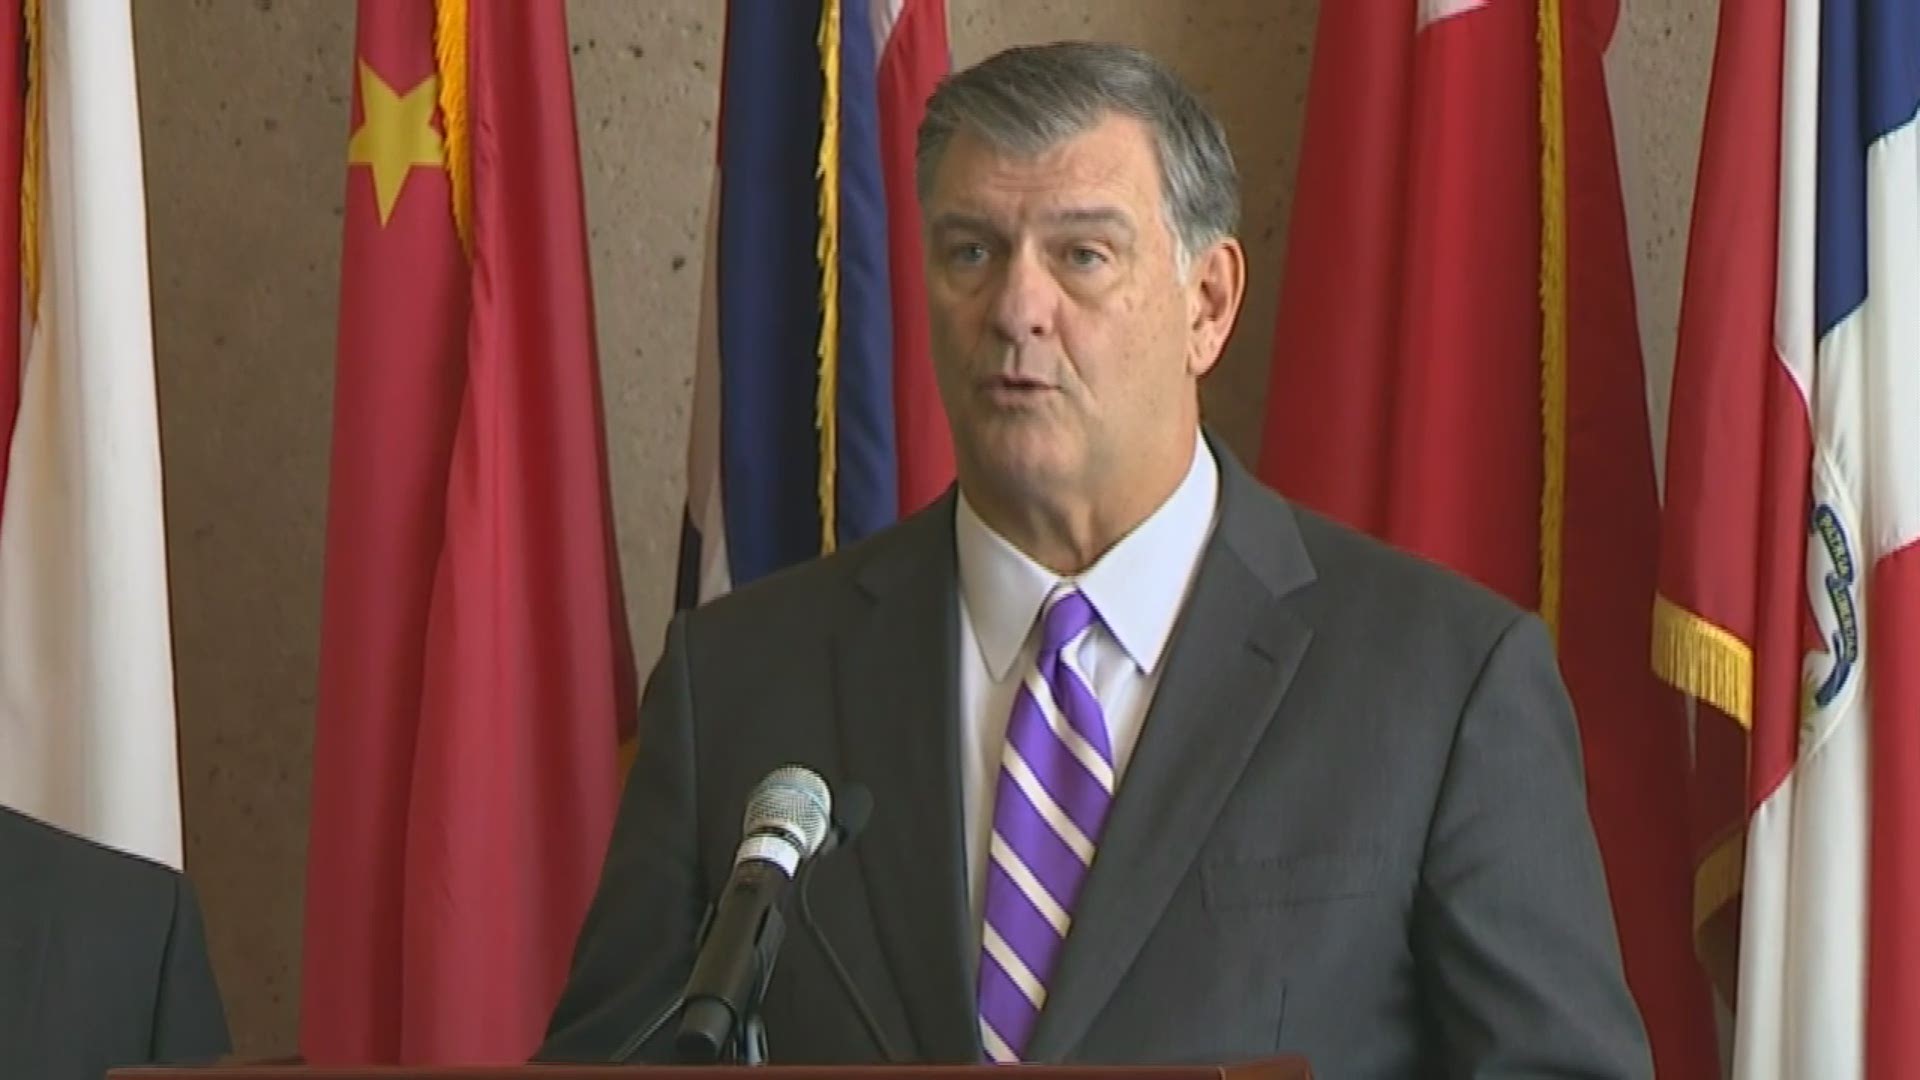 Dallas Mayor Mike Rawlings addresses Thursday's announcement that Police Chief David Brown would retire.